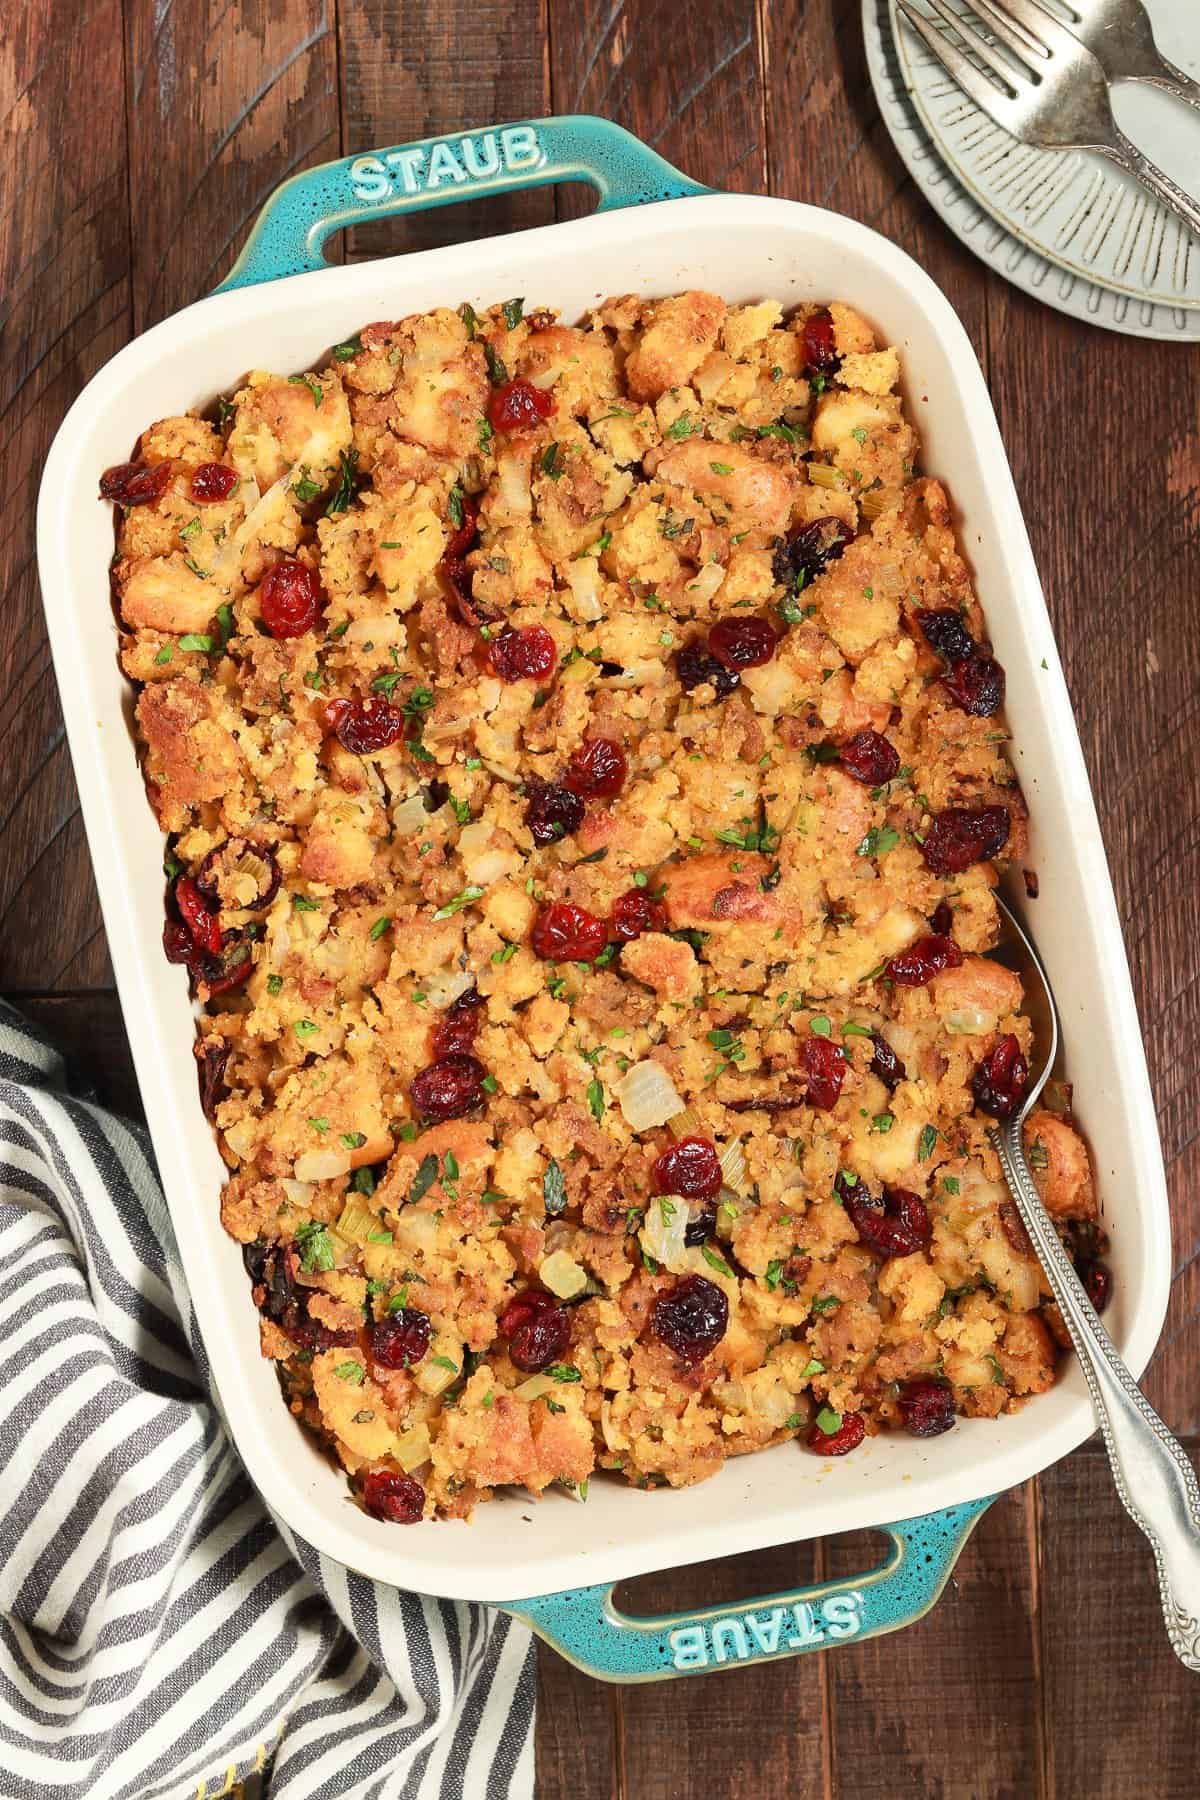 Overhead view of a fully baked vegan cornbread stuffing in a casserole dish.